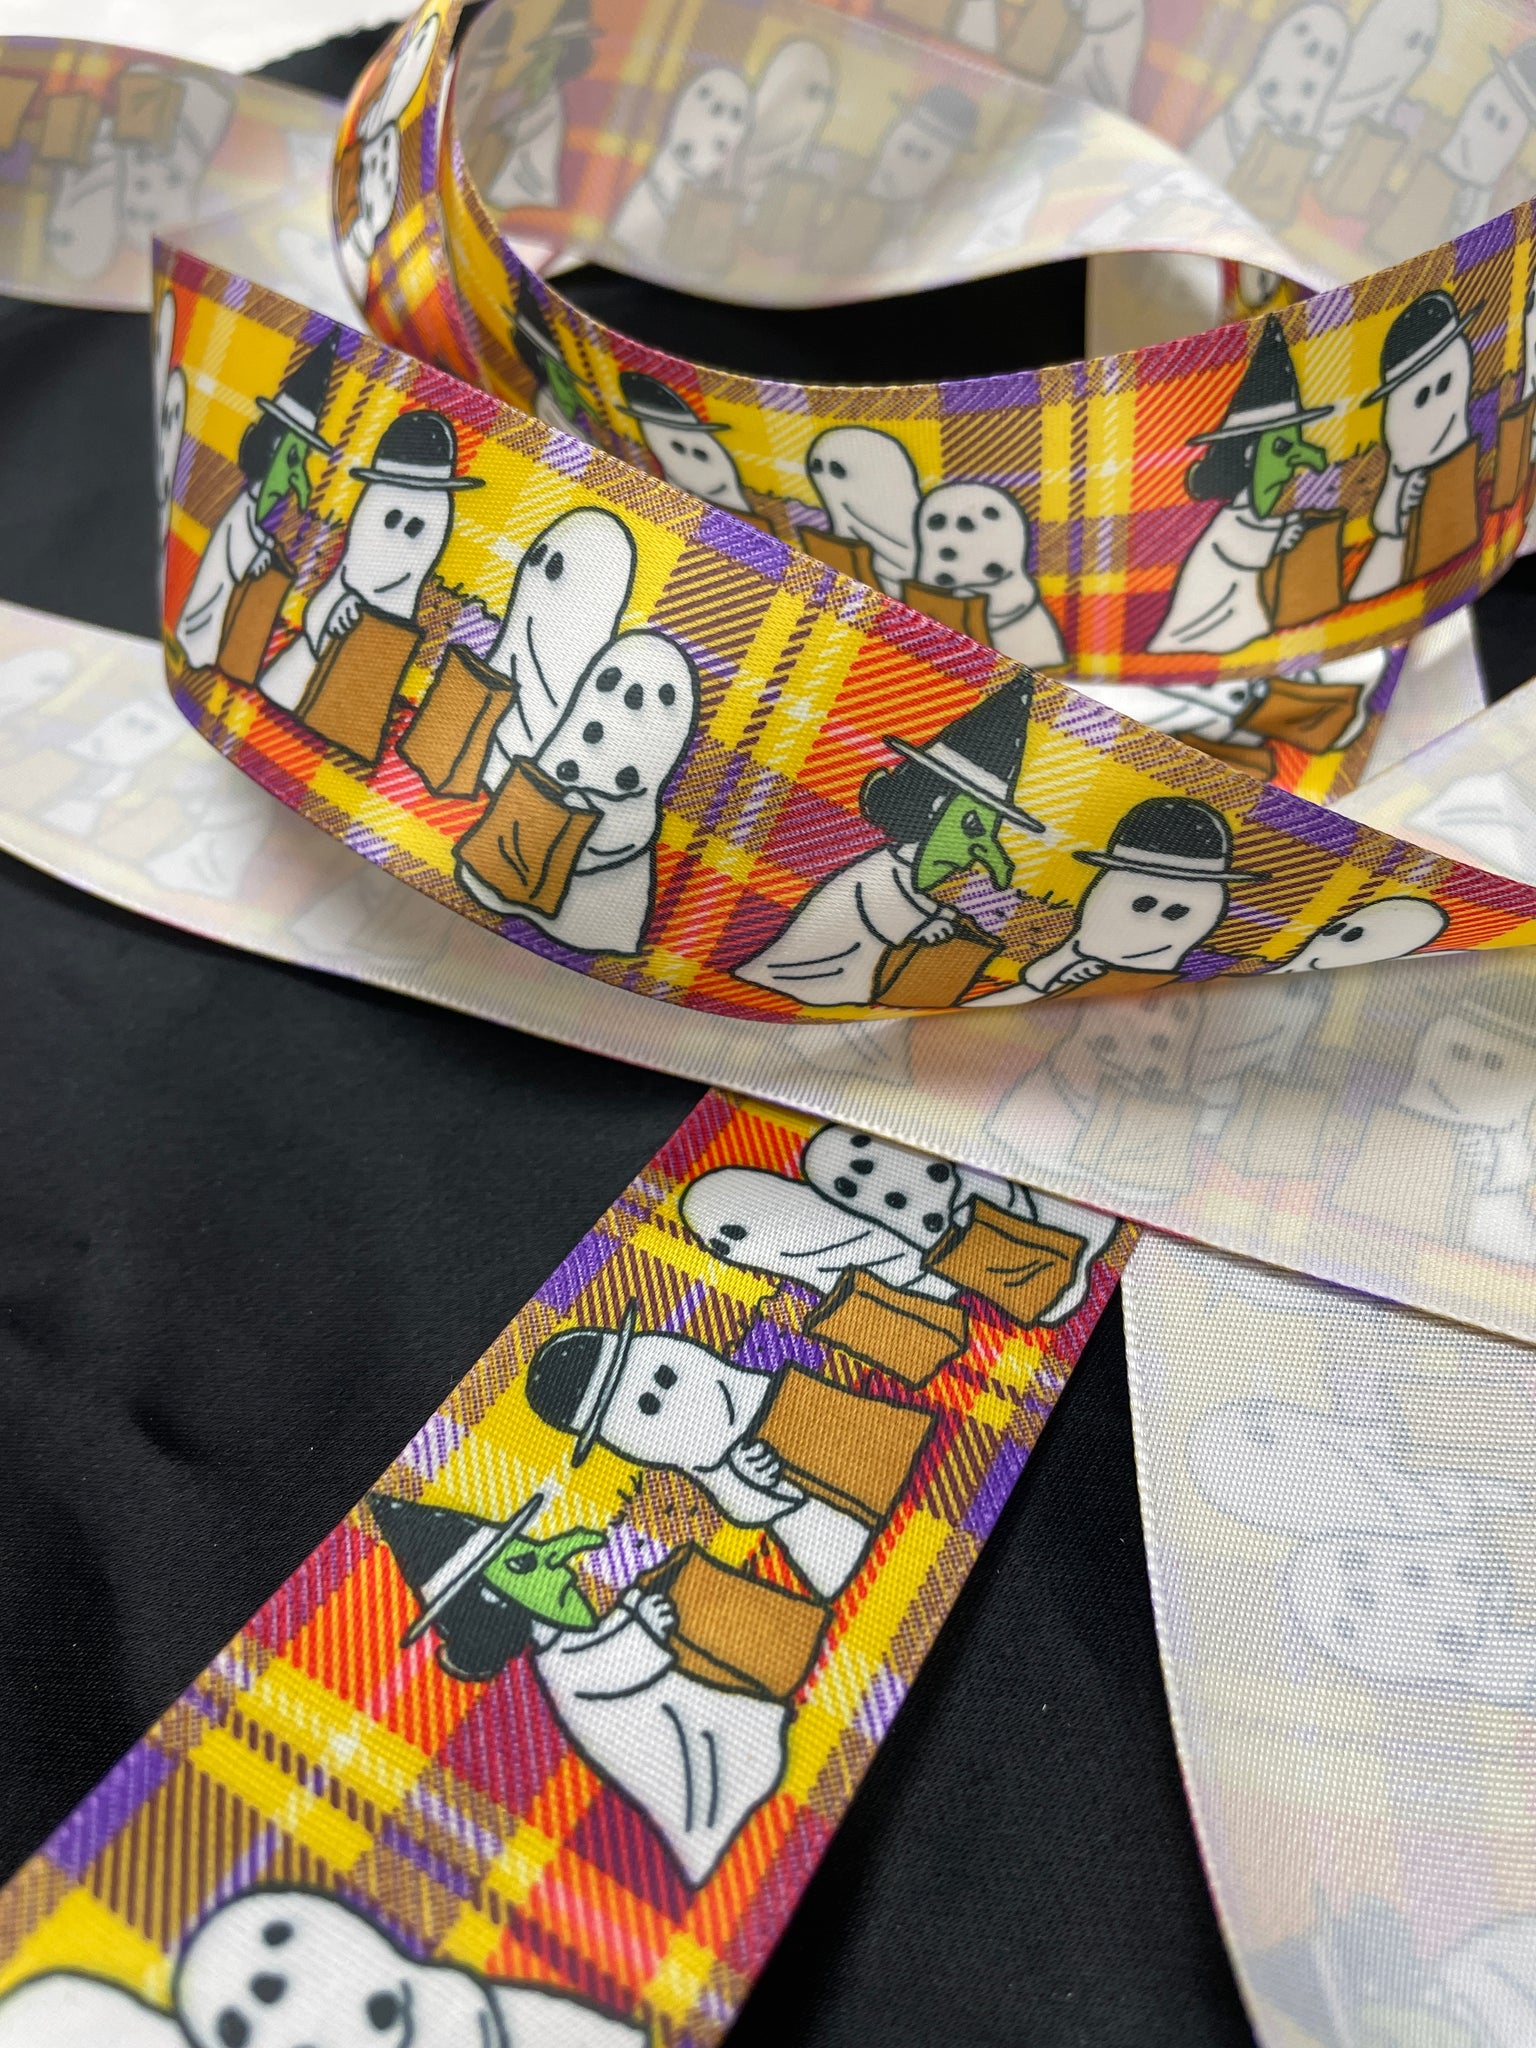 2012 3 1/8 YD Polyester Printed Satin Ribbon - Yellow Plaid with "Trick or Treat" and Peanuts Characters Trick or Treating